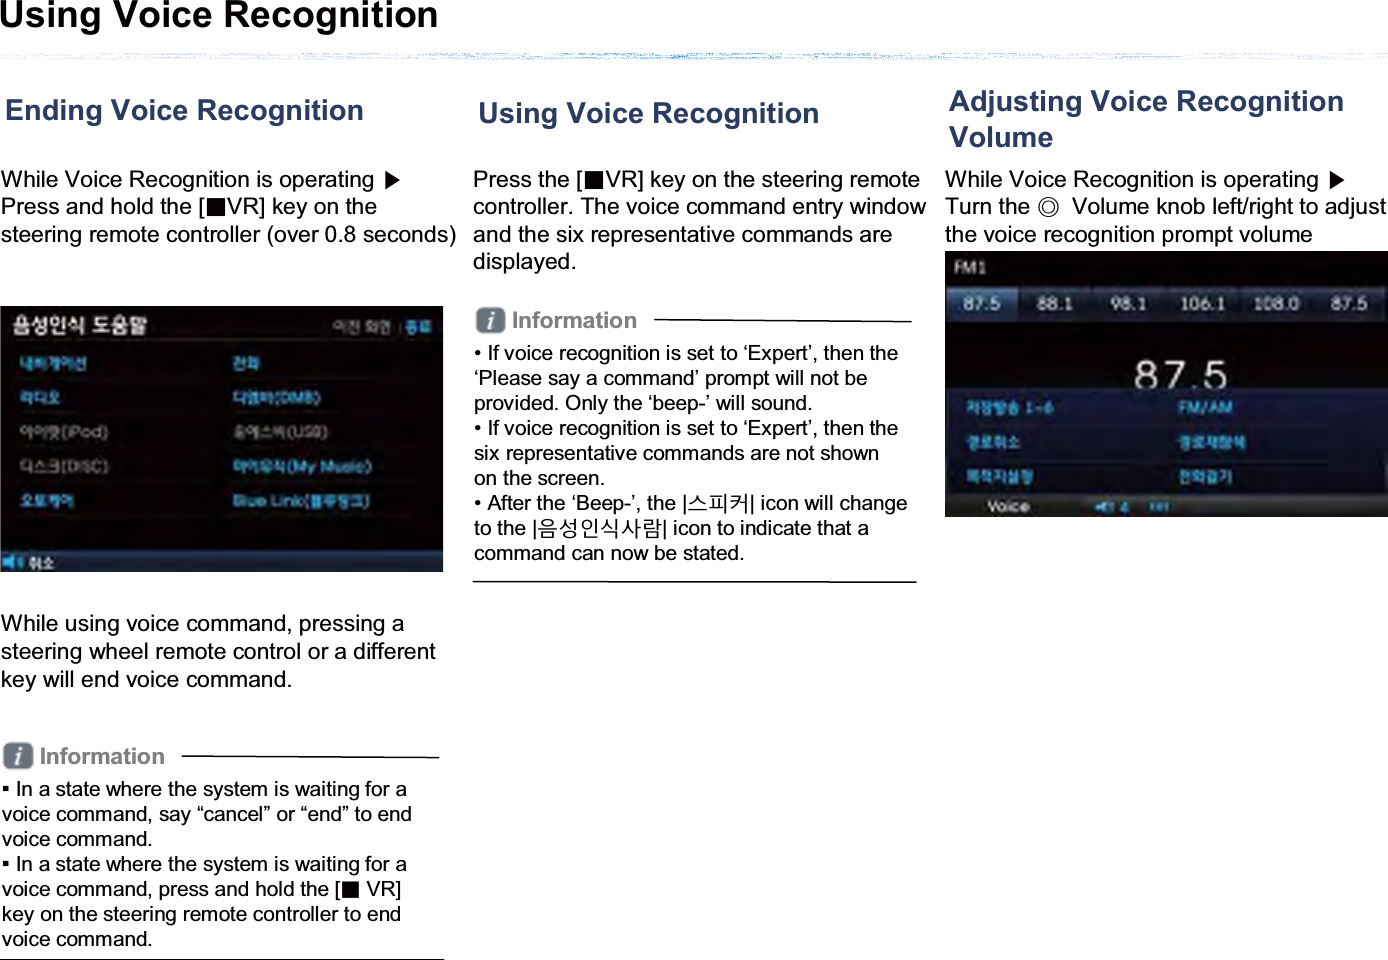 Using Voice RecognitionEnding Voice RecognitionWhile Voice Recognition is operating ೛Press and hold the [ȿVR] key on the steering remote controller (over 0.8 seconds)While using voice command, pressing a steering wheel remote control or a different key will end voice command. Information̲In a state where the system is waiting for a voice command, say “cancel” or “end” to end voice command. ̲In a state where the system is waiting for a voice command, press and hold the [ȿVR] key on the steering remote controller to end voice command. Using Voice RecognitionPress the [ȿVR] key on the steering remote controller. The voice command entry window and the six representative commands are displayed.Information• If voice recognition is set to ‘Expert’, then the ‘Please say a command’ prompt will not be provided. Only the ‘beep-’ will sound.• If voice recognition is set to ‘Expert’, then the six representative commands are not shown on the screen. • After the ‘Beep-’, the |ݛଔ৲| icon will change to the |ࡸ۽ࢉݥیԆ| icon to indicate that a command can now be stated.Adjusting Voice Recognition VolumeWhile Voice Recognition is operating ೛Turn the ೣVolume knob left/right to adjust the voice recognition prompt volume